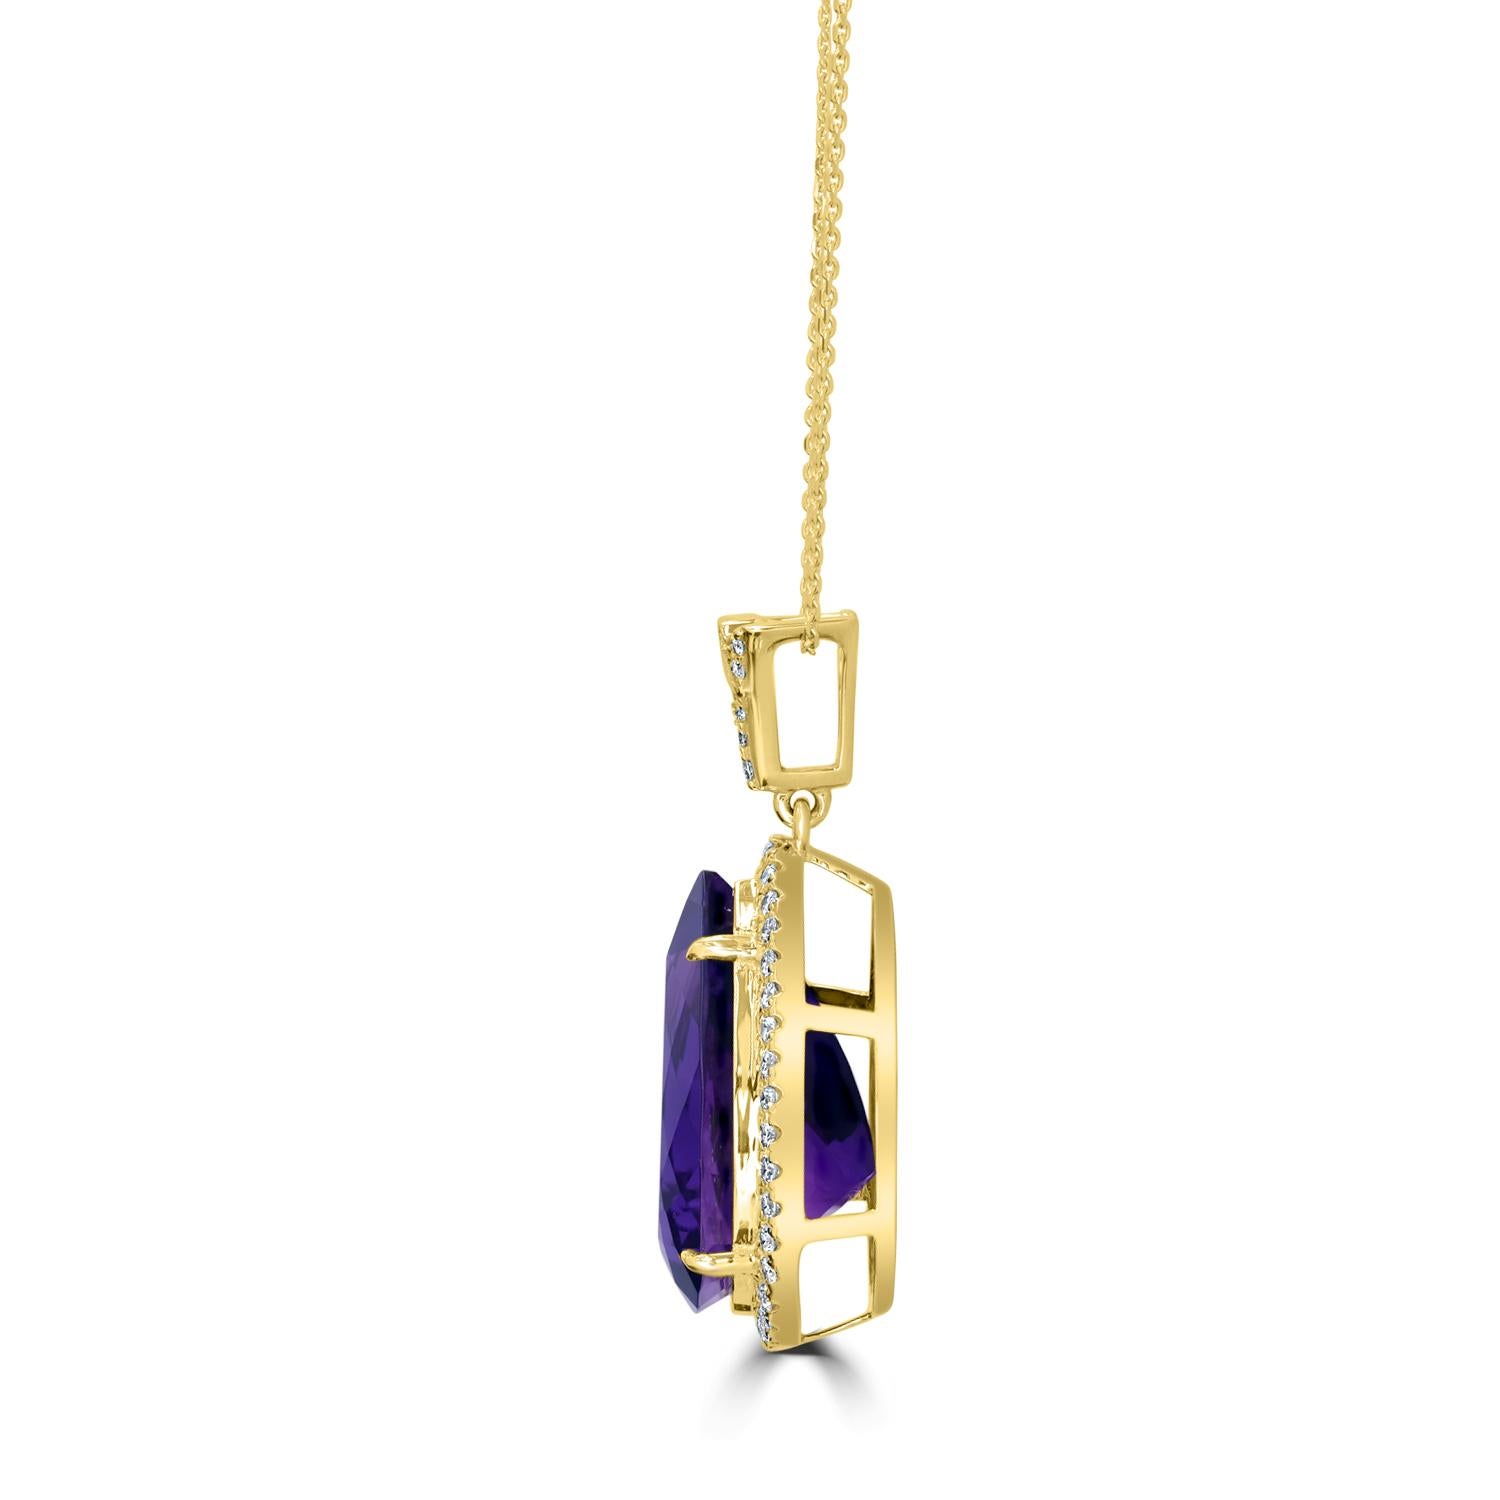 Introducing a magnificent piece of jewelry that is sure to capture your heart, the 11.84 carats Uruguay Amethyst and Diamond Pendant. This stunning pendant features a super dark and deeply saturated amethyst, weighing an impressive 11.84 carats, in